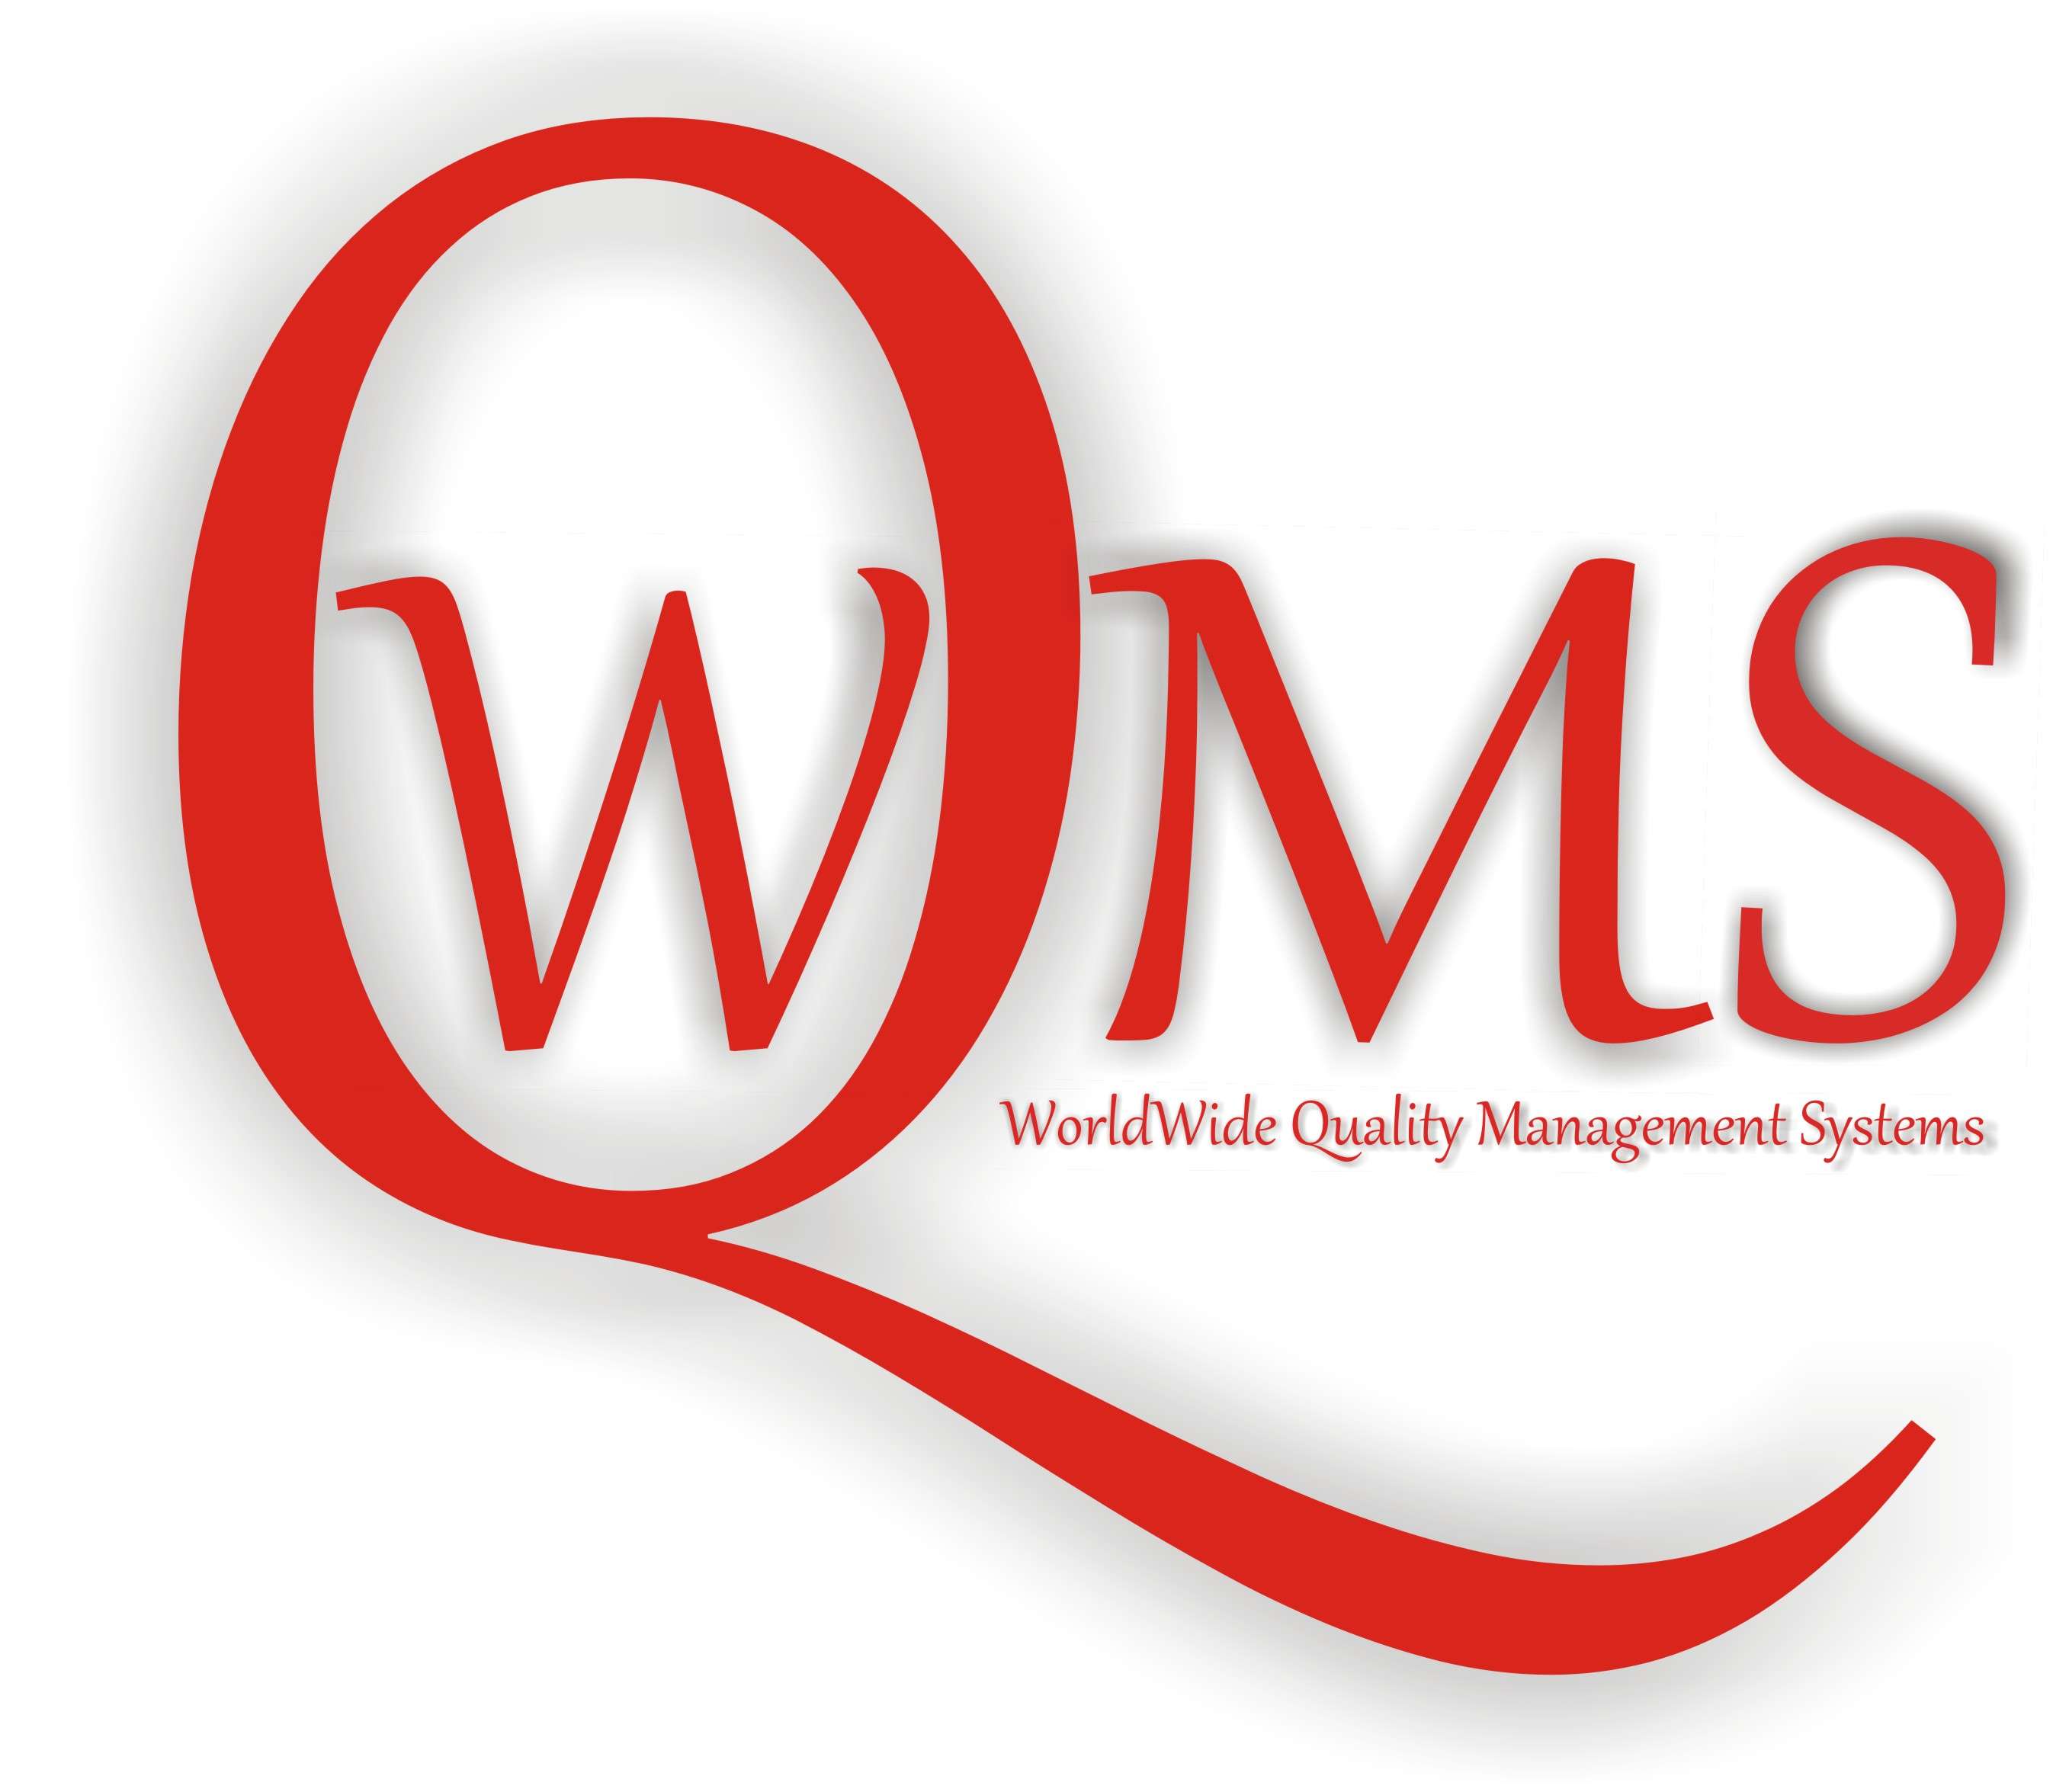 Worldwide Quality Management Systems